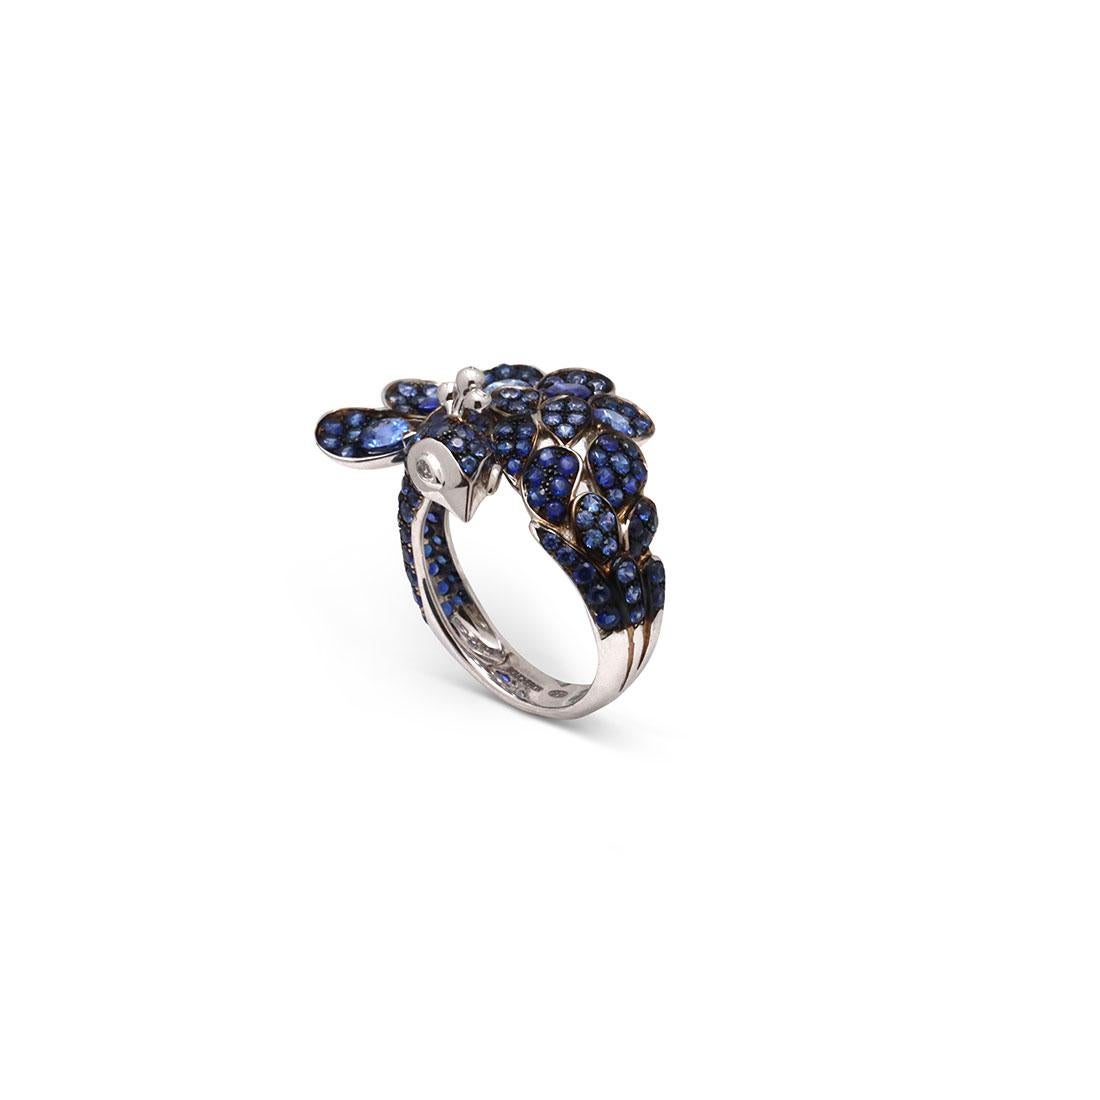 Authentic Boucheron Héra ring crafted in 18 karat white gold features a stunning peacock frame with pave round brilliant and pear-shaped blue sapphires. The eyes of the peacock are comprised of pear-shaped diamonds with an estimated .15 total carat